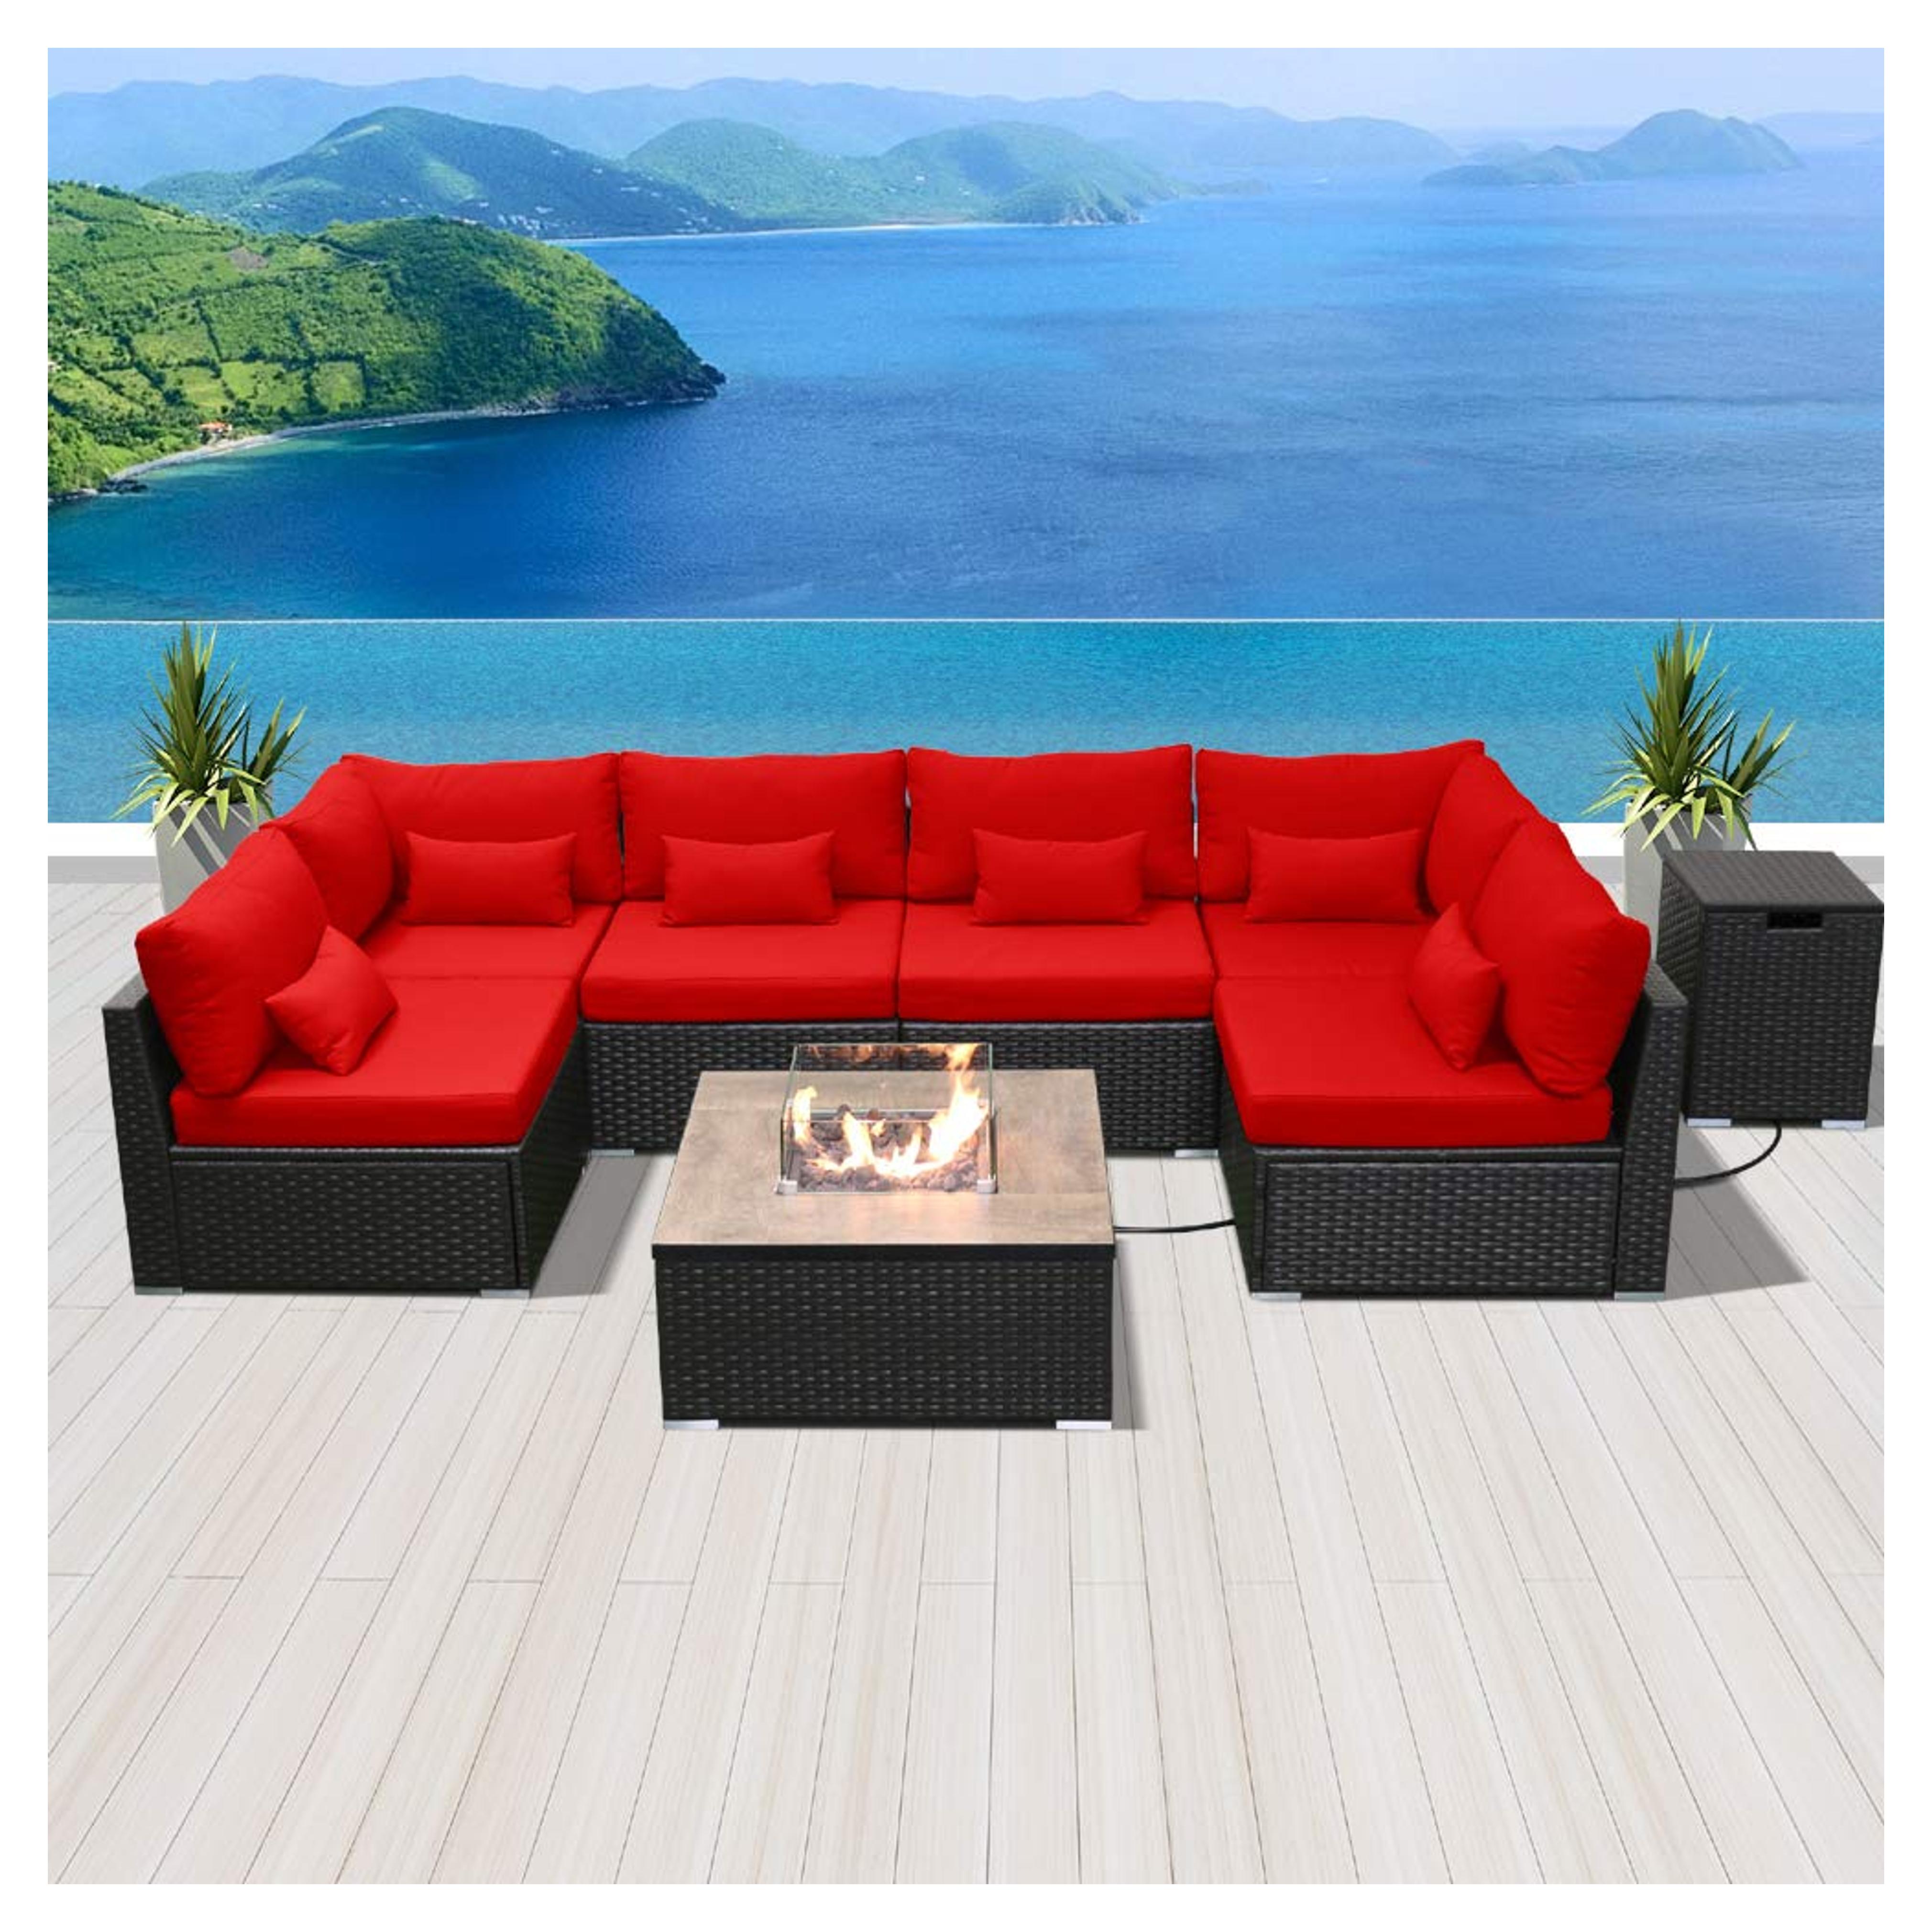 DINELI Patio Furniture Sectional Sofa with Gas Fire Pit Table Outdoor Patio Furniture Sets Propane Fire Pit (red-Square Table)